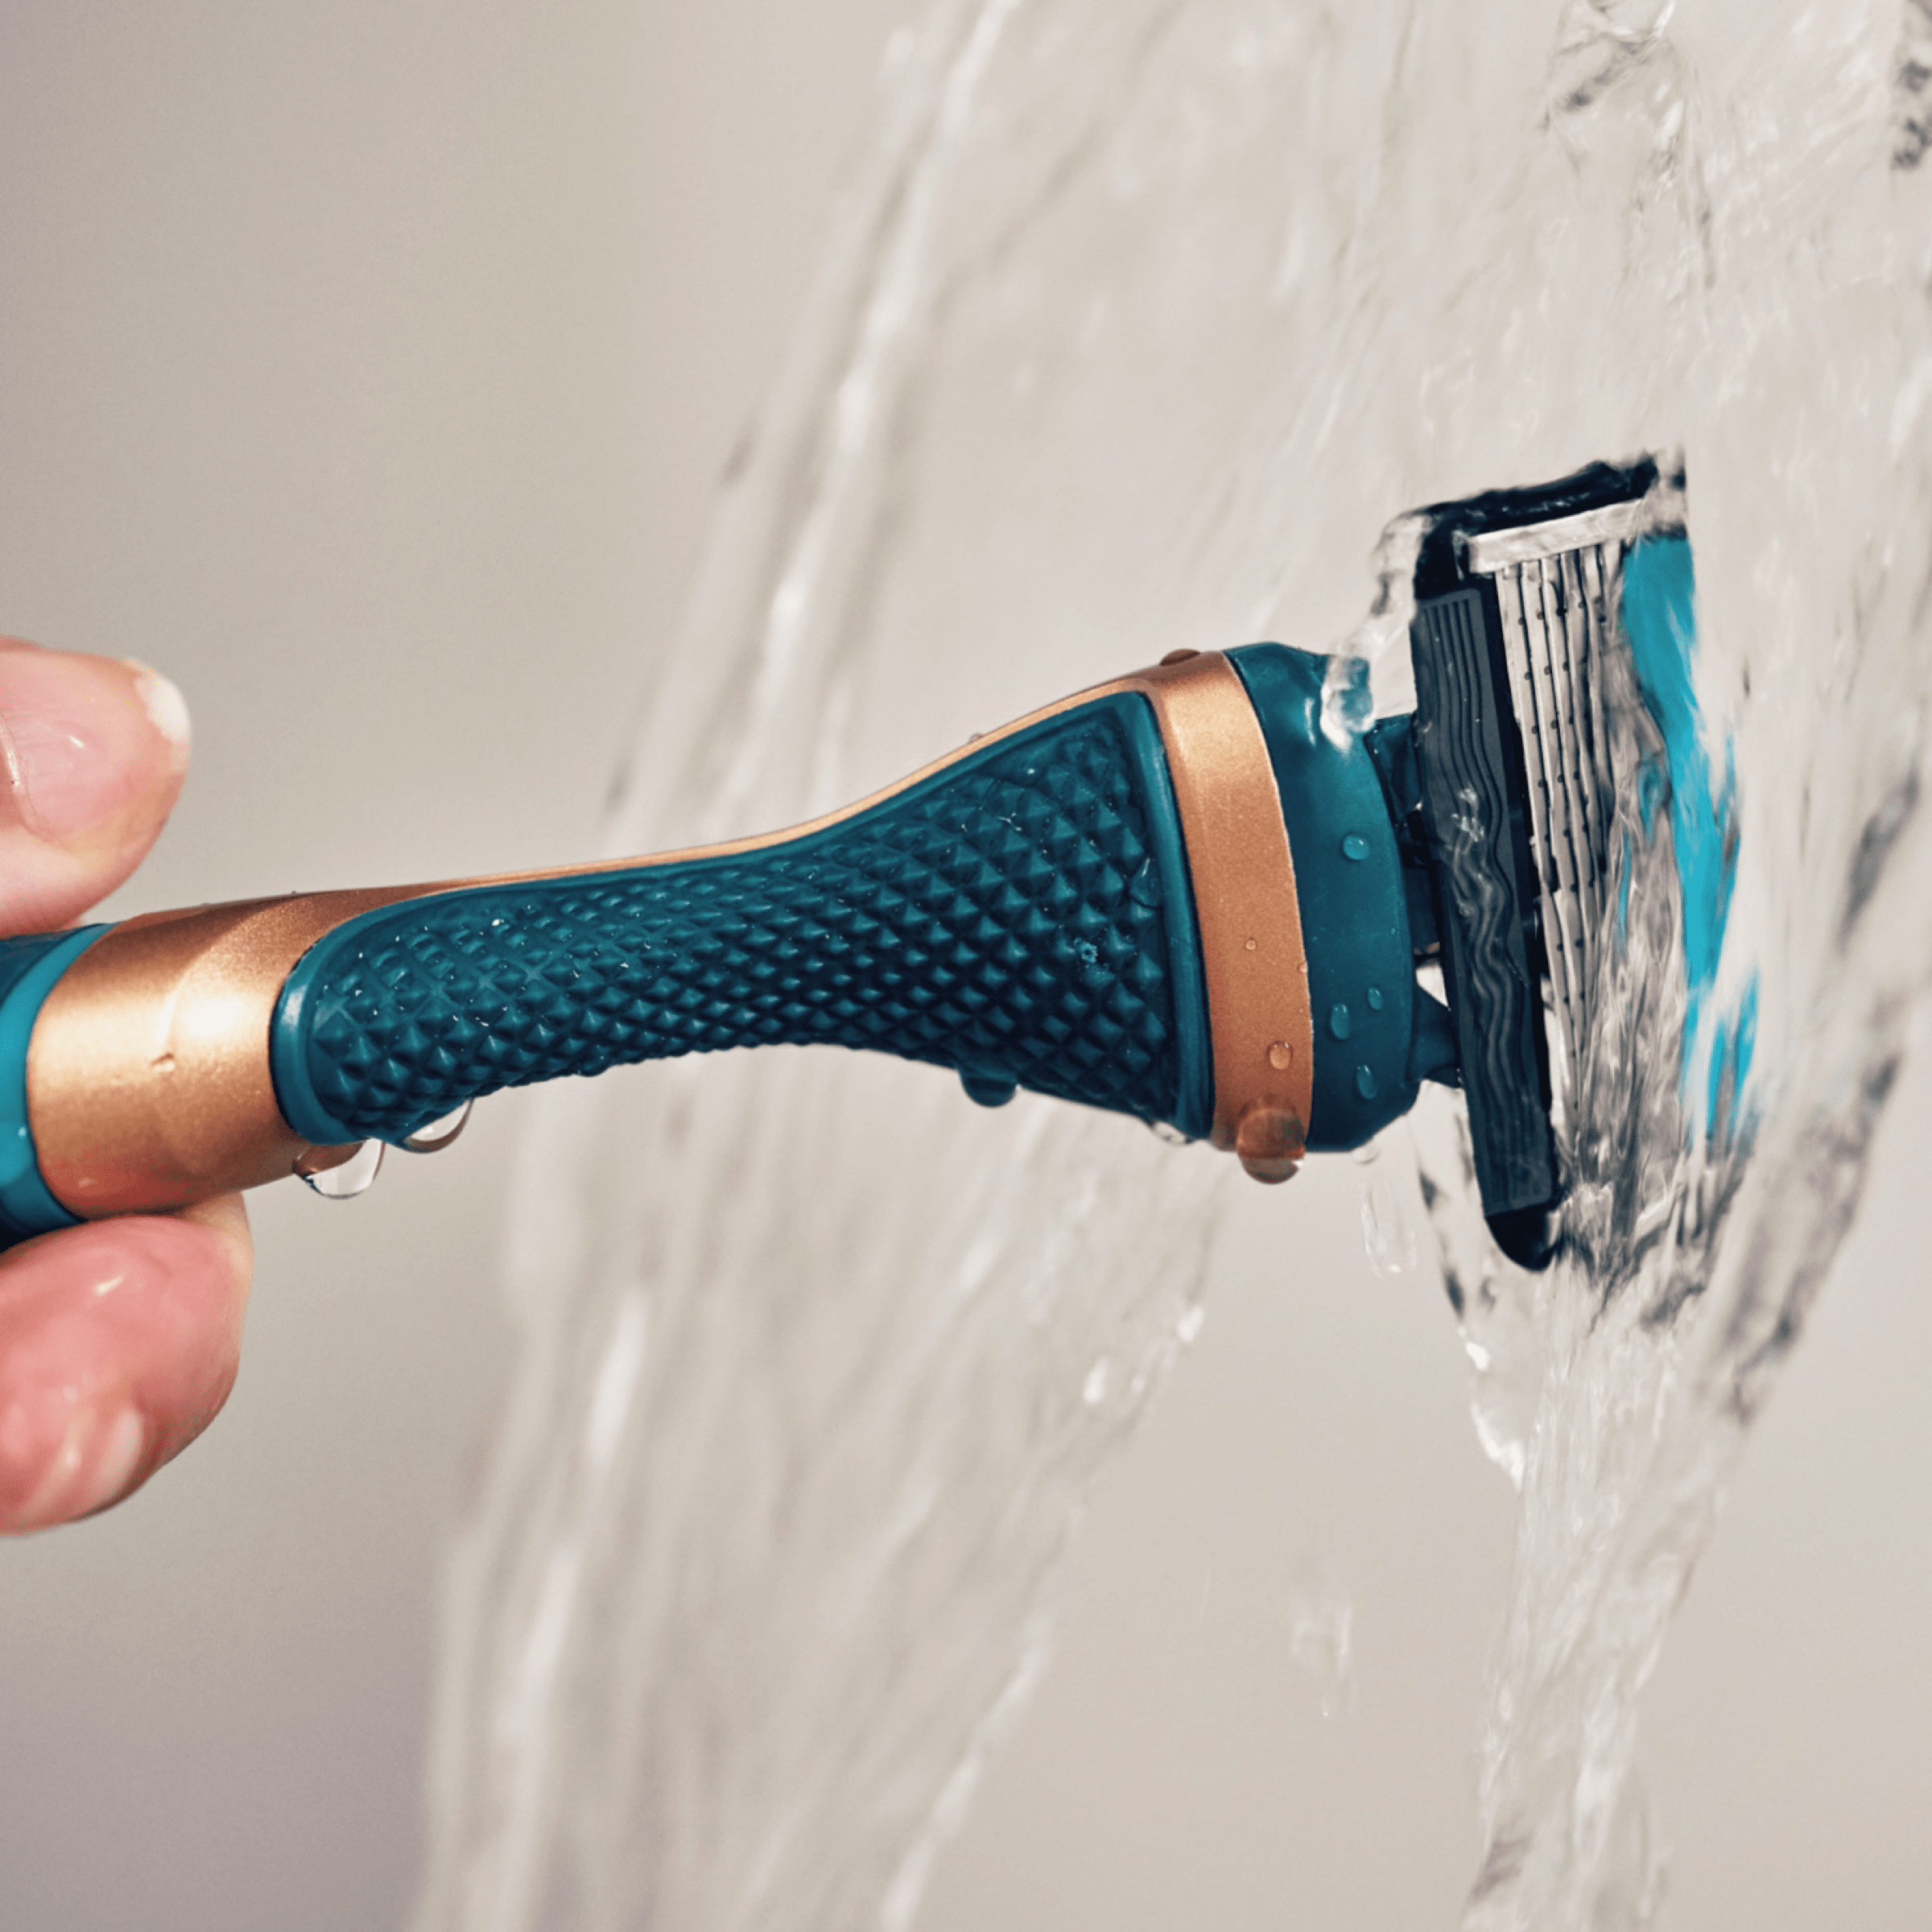 Dollar Shave Club body Shaver Handle shown being used running under water.